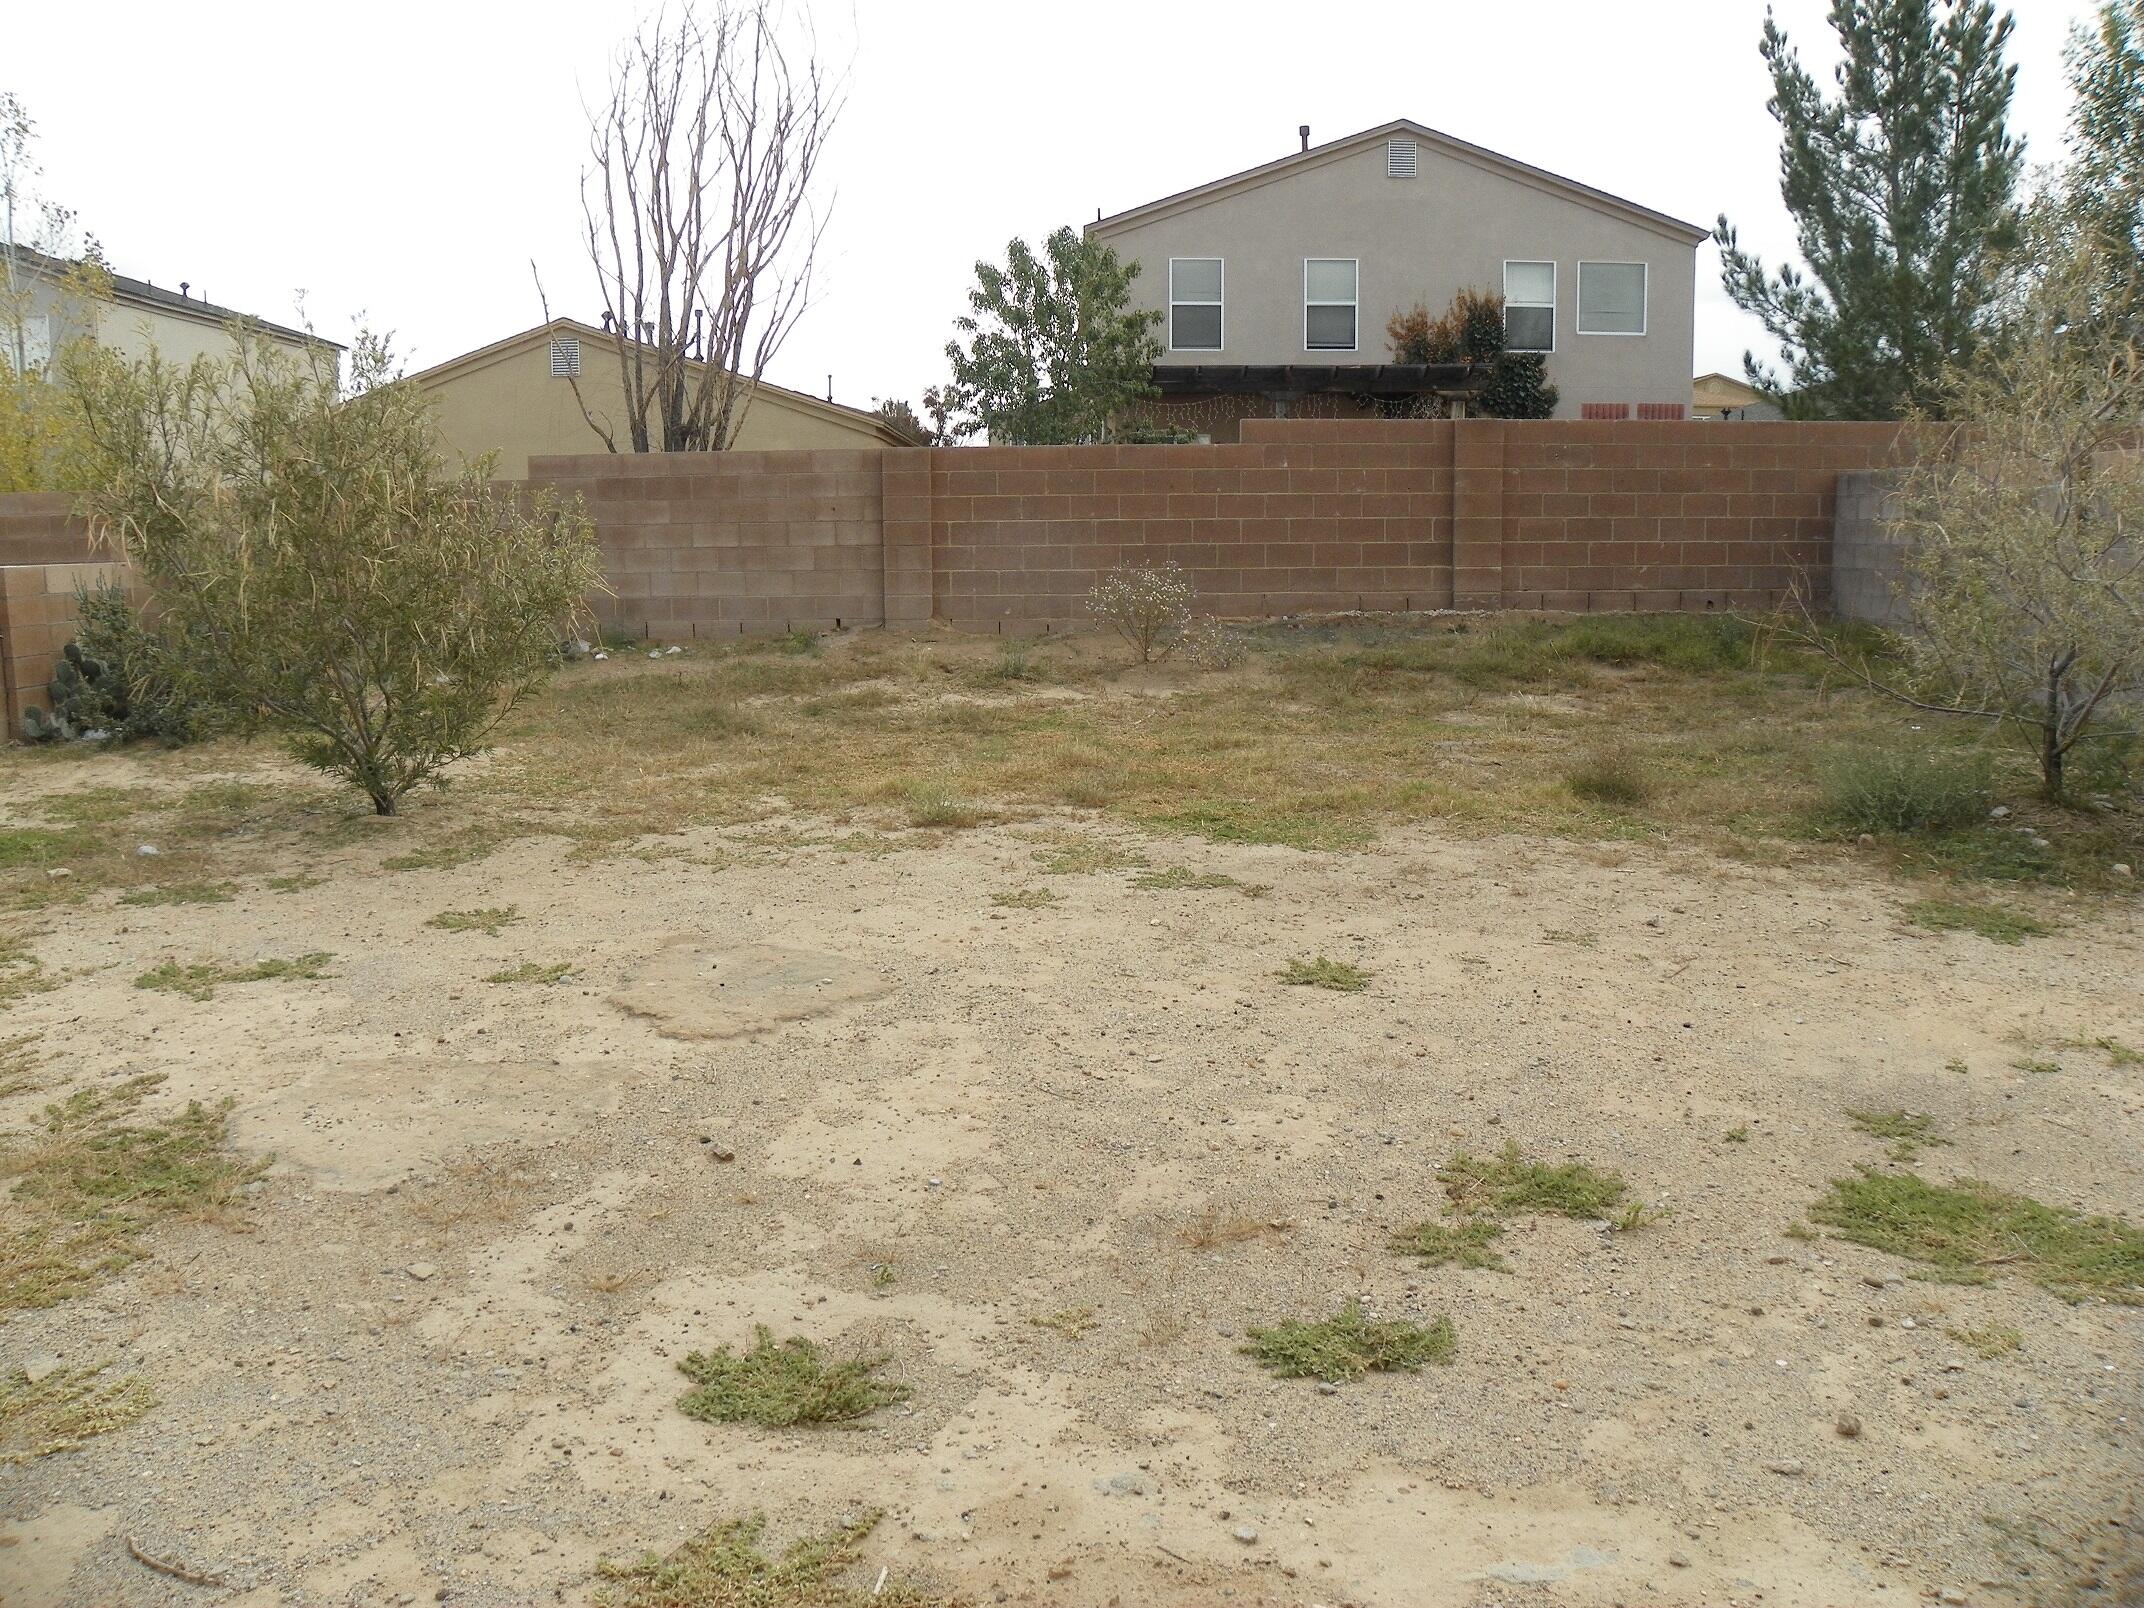 6912 Brindisi Place NW, Albuquerque, New Mexico 87114, 3 Bedrooms Bedrooms, ,3 BathroomsBathrooms,Residential,For Sale,6912 Brindisi Place NW,1060971